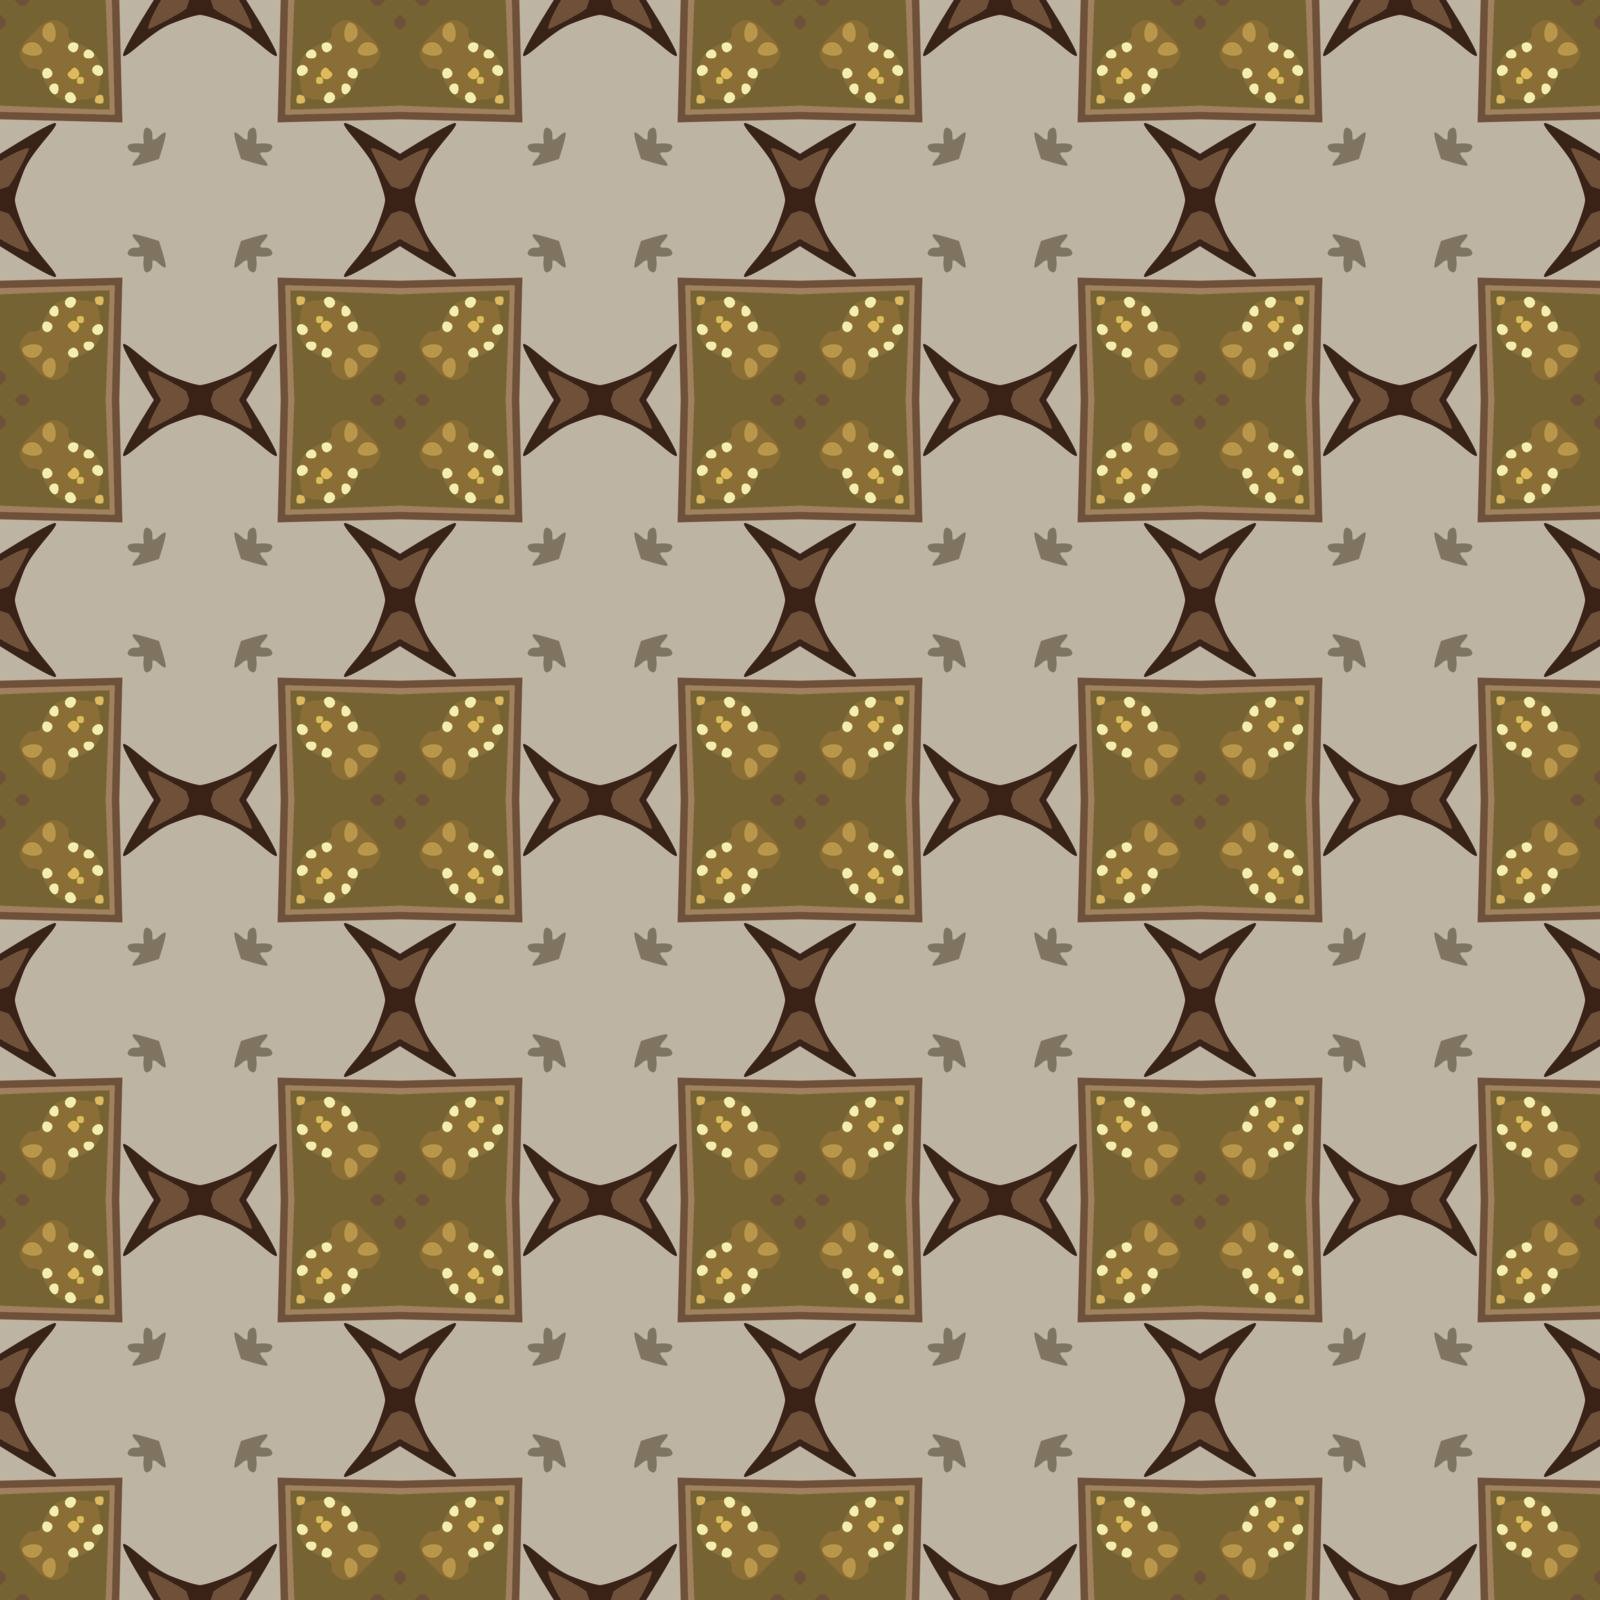 Seamless illustrated pattern made of abstract elements in beige, yellow, brown and gray